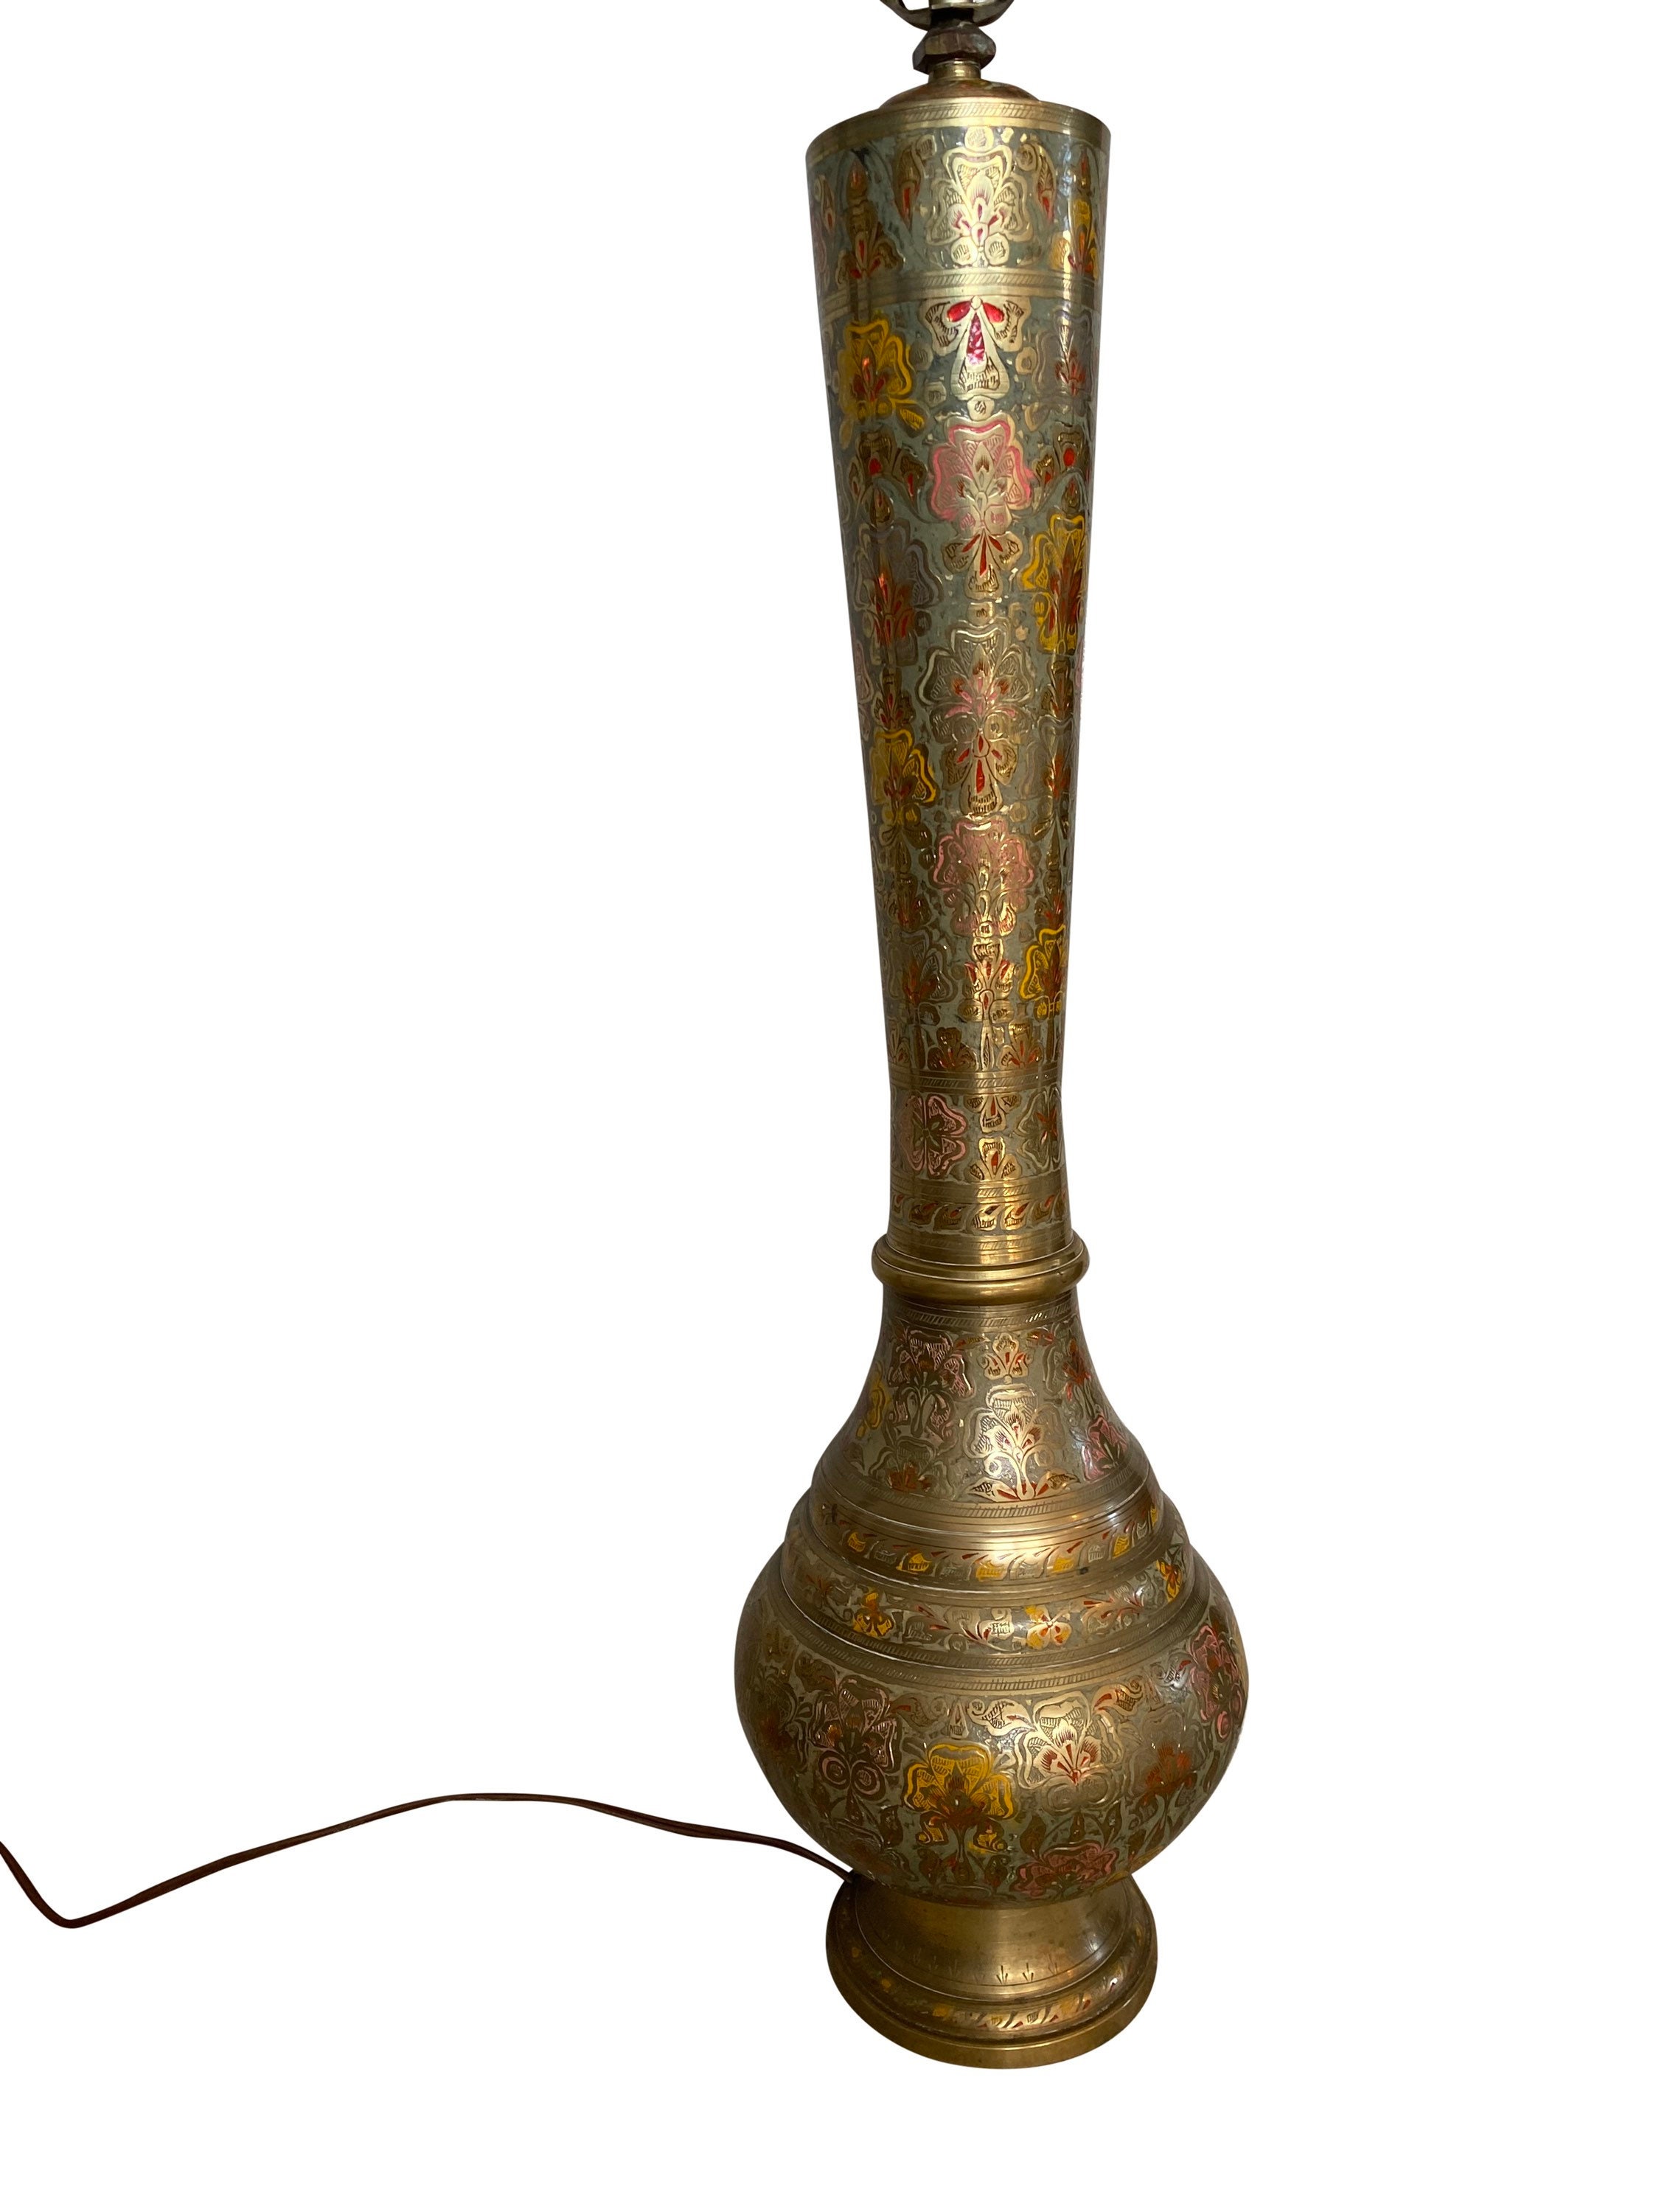 Turkish Vintage Tall Brass Lamp /middle Eastern Ornate Etched Brass Lamp /  Antique Circa 1930s Brass Lamp / 26 Tall Painted Brass Lamp 